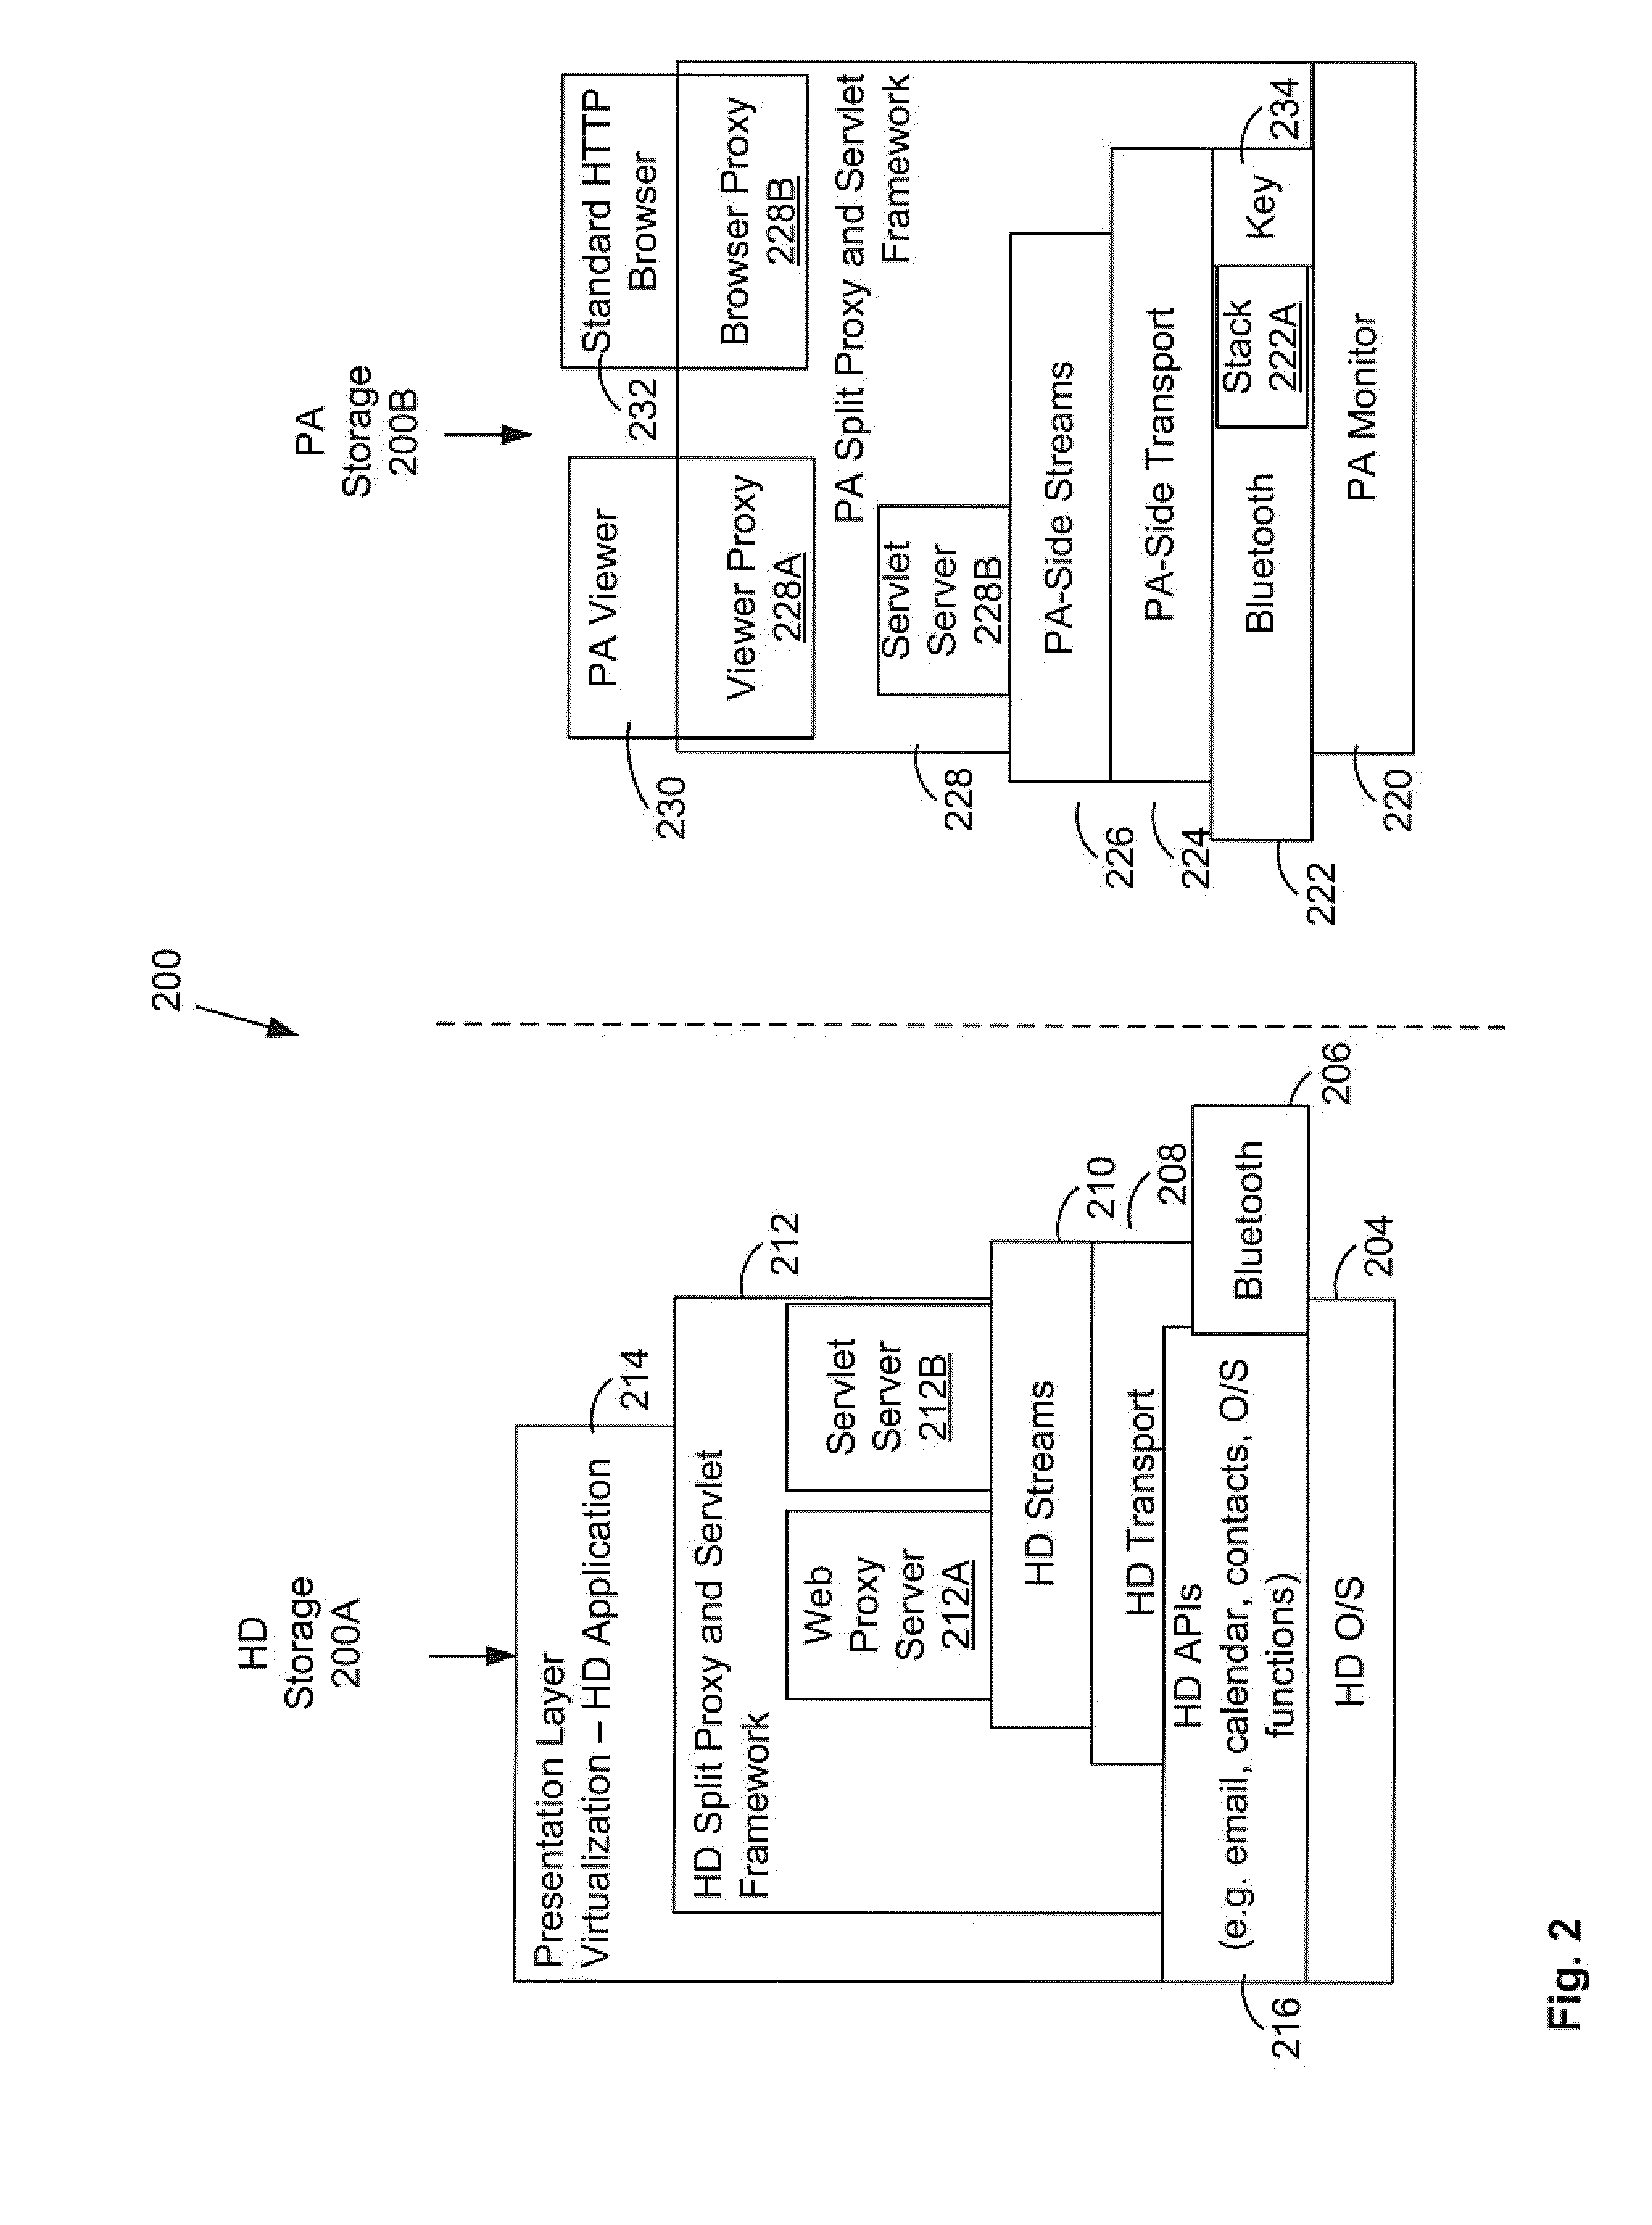 Secured presentation layer virtualization for wireless handheld communication device having endpoint independence